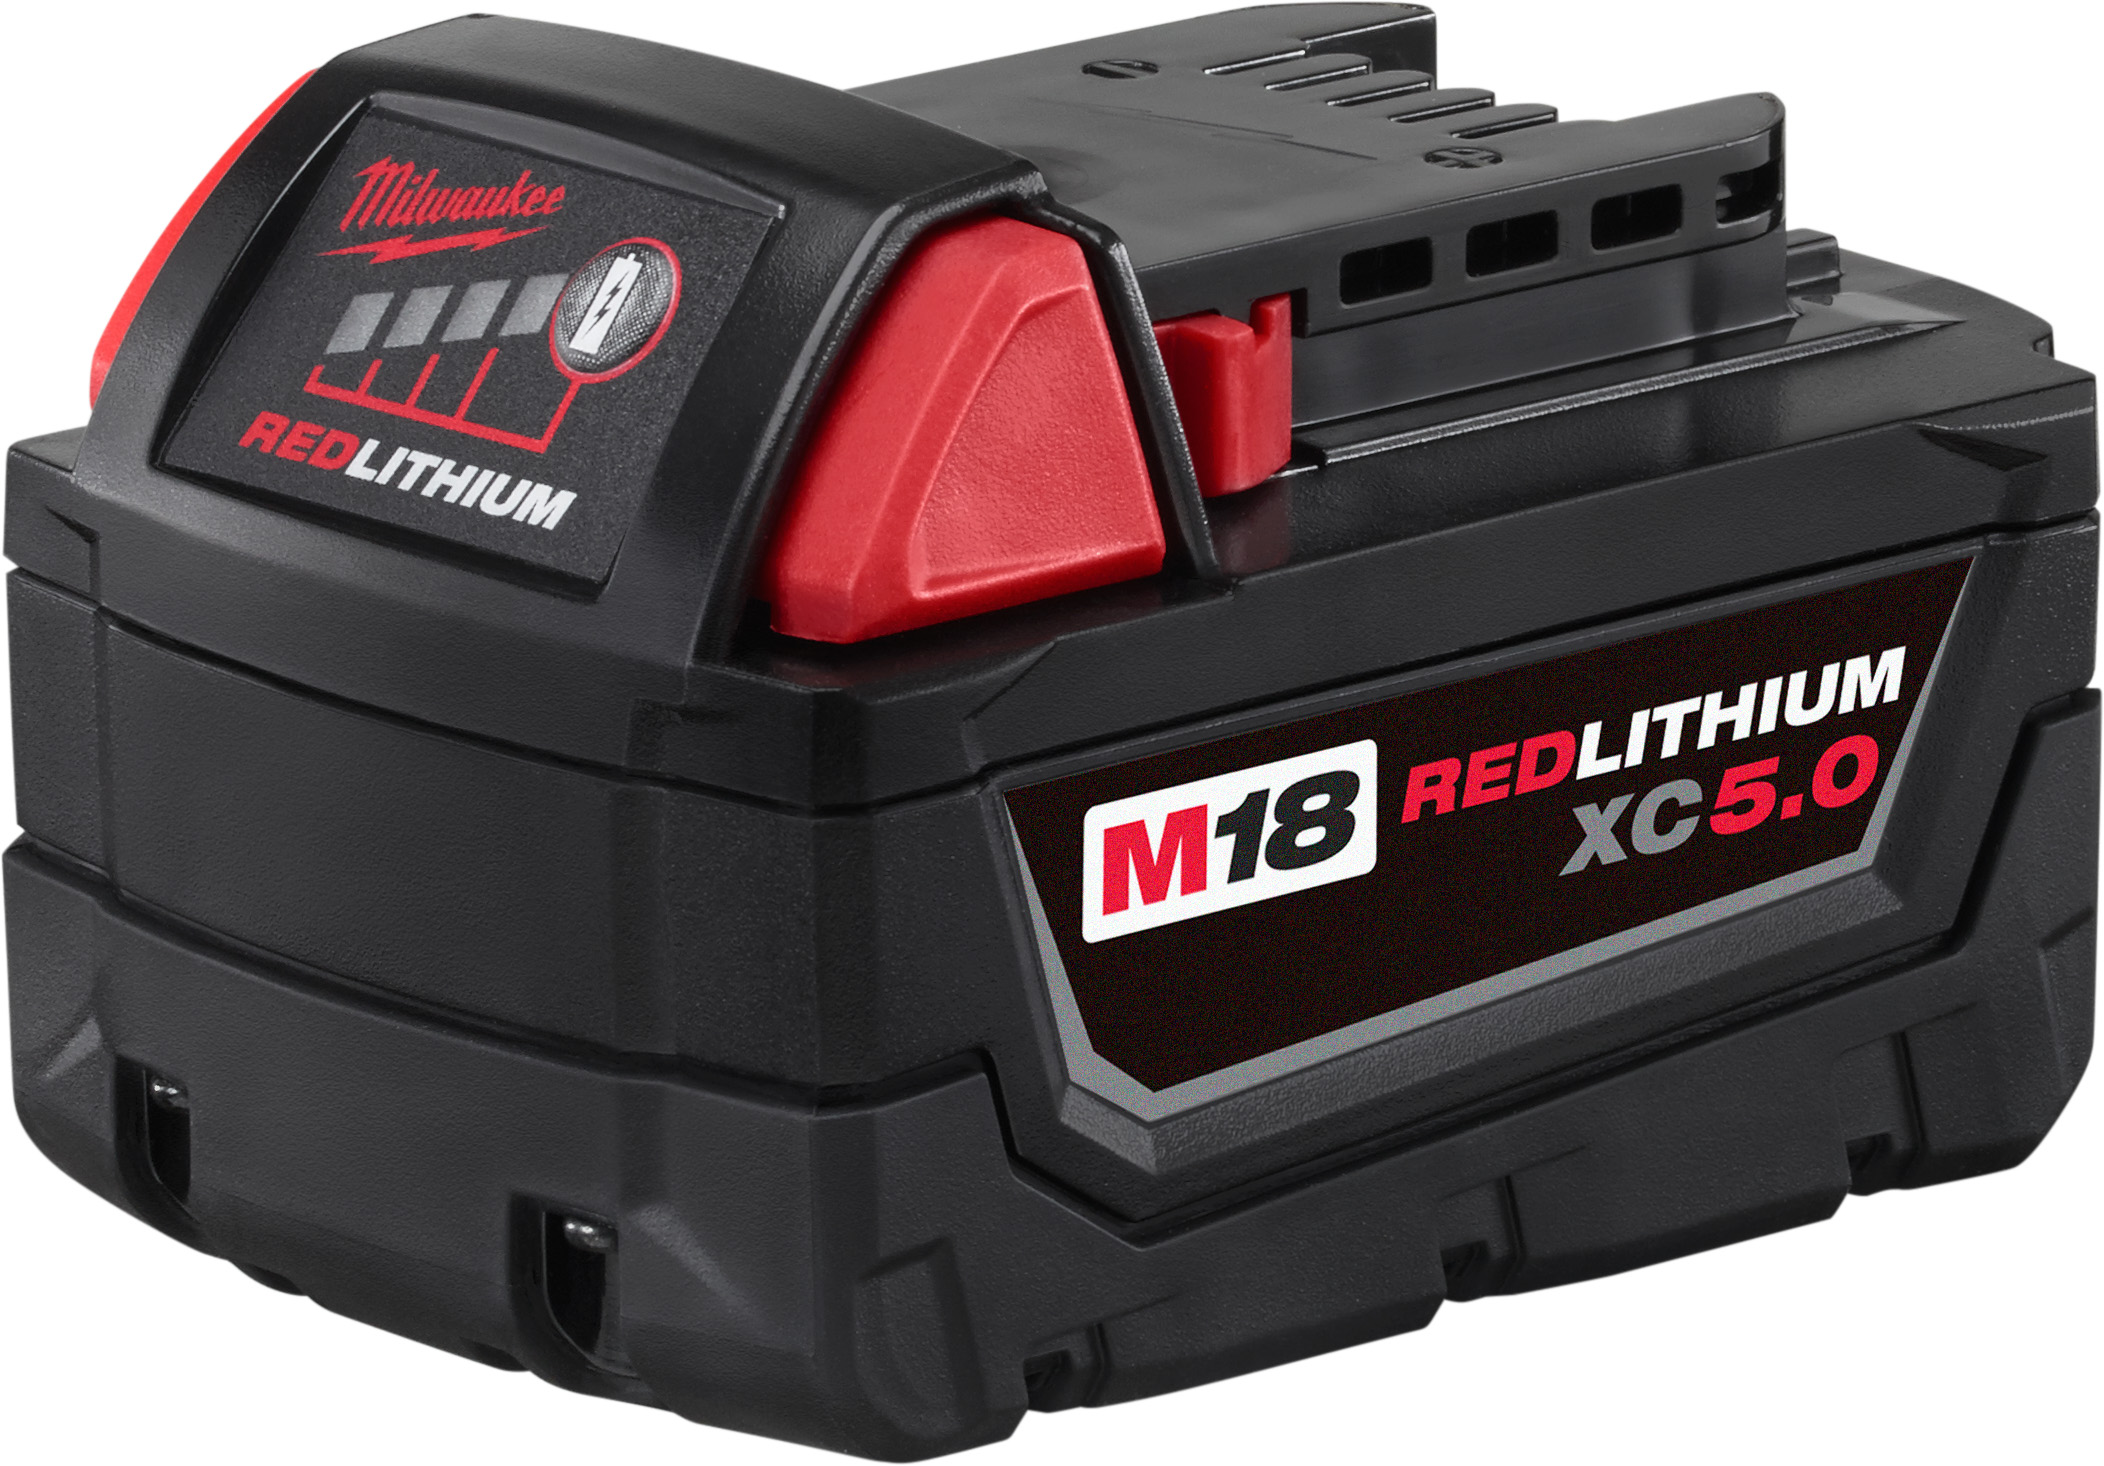 Delivers up to 2.5X more run-time, 20% more power and 2X more life than standard lithium-ion batteries. The M18™ REDLITHIUM™ XC 5.0 extended capacity battery pack features superior pack construction, electronics, and performance to deliver more work...